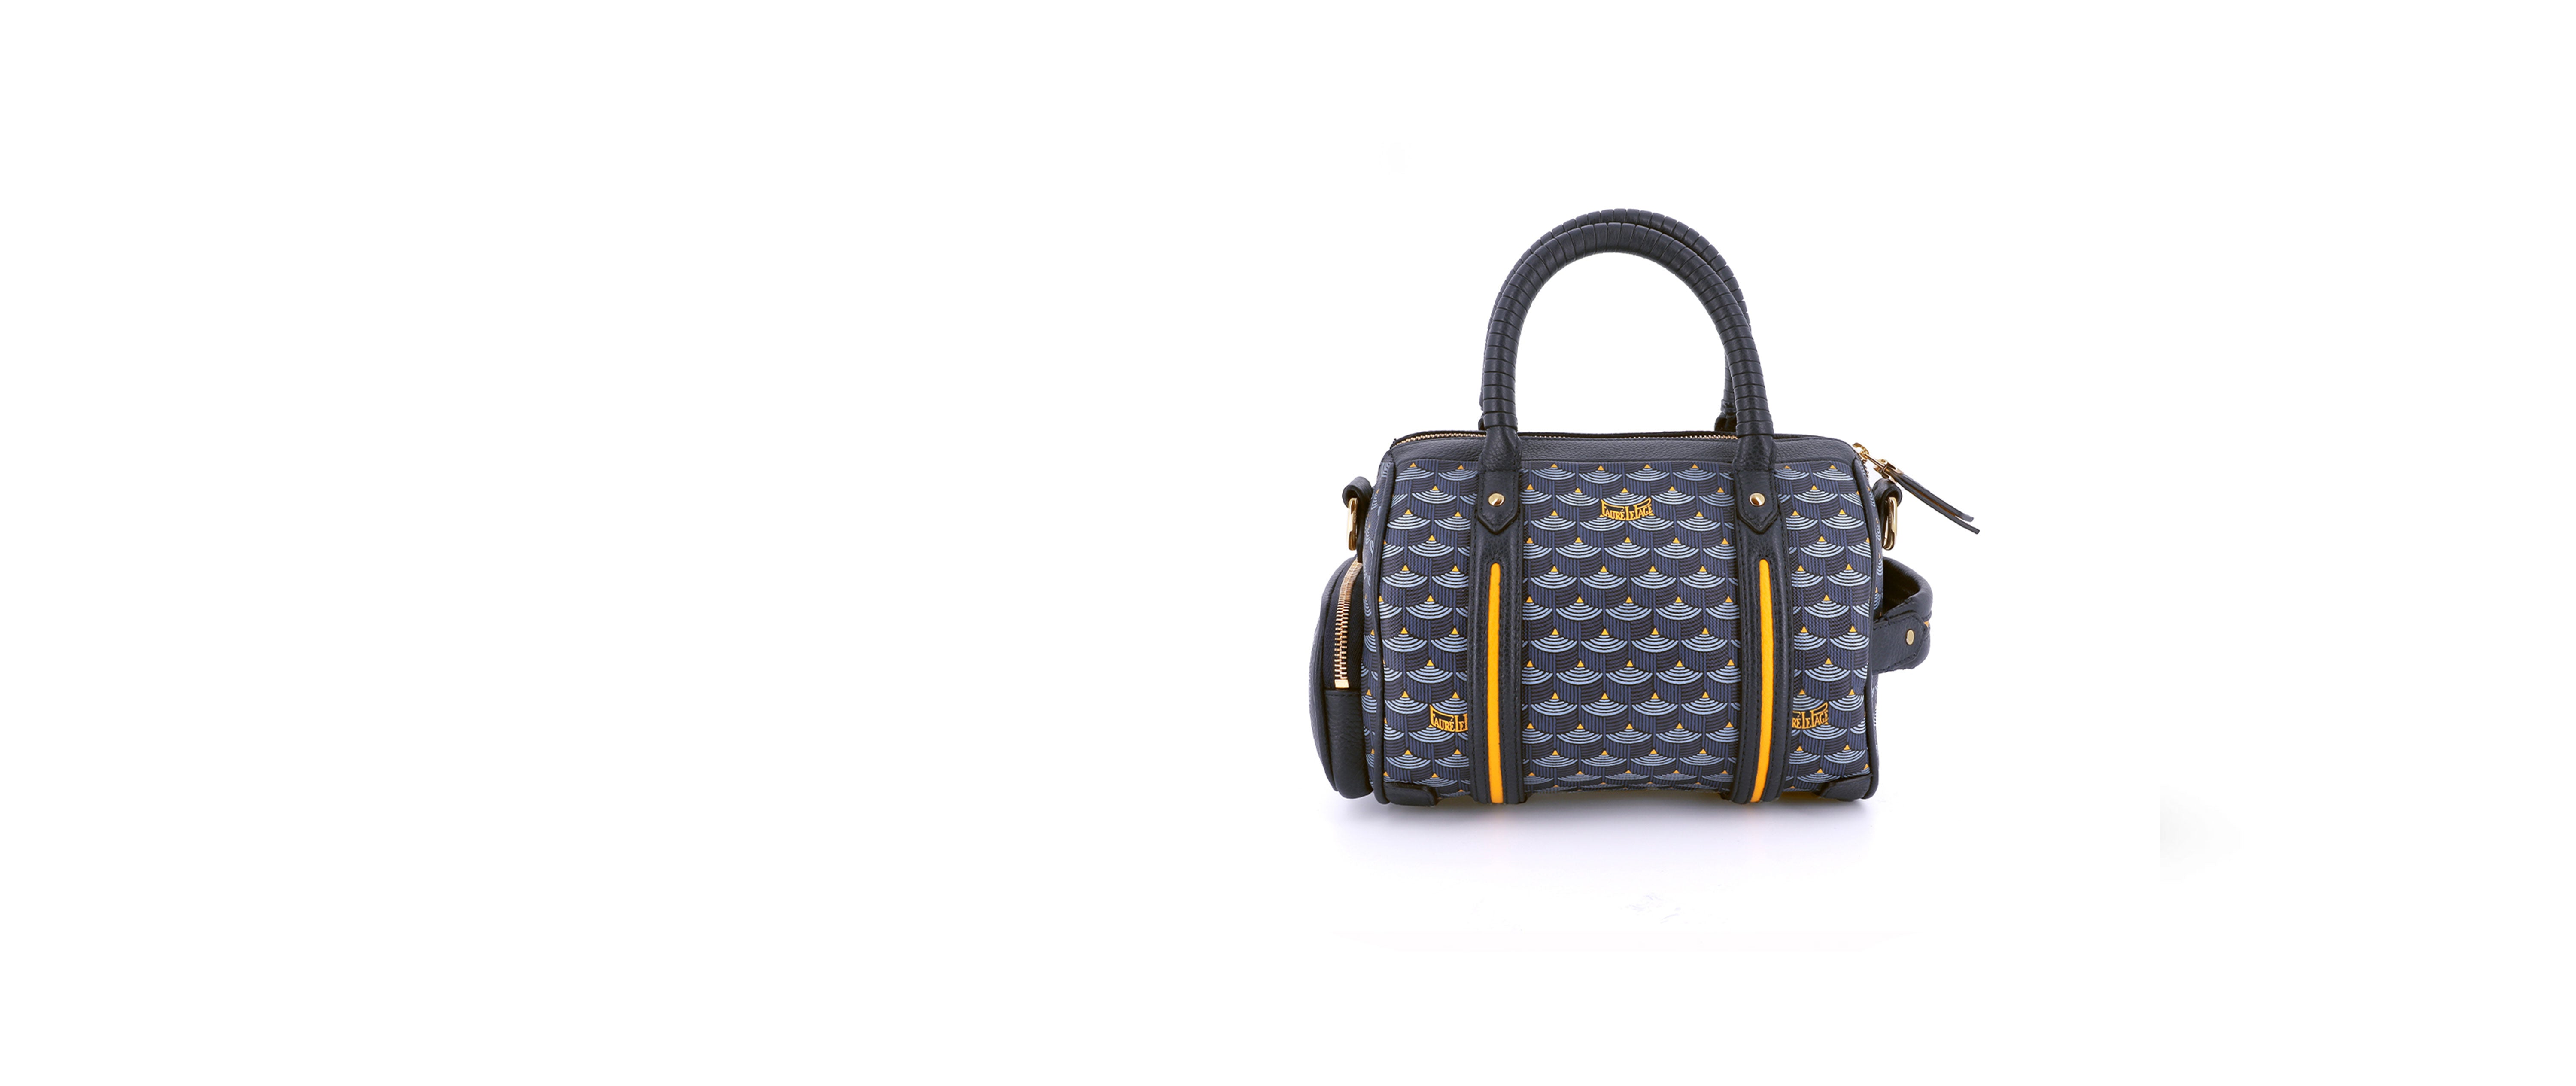 Luxury Handmade Bag Limited Edition - Made in Italy - DAF&DREAM